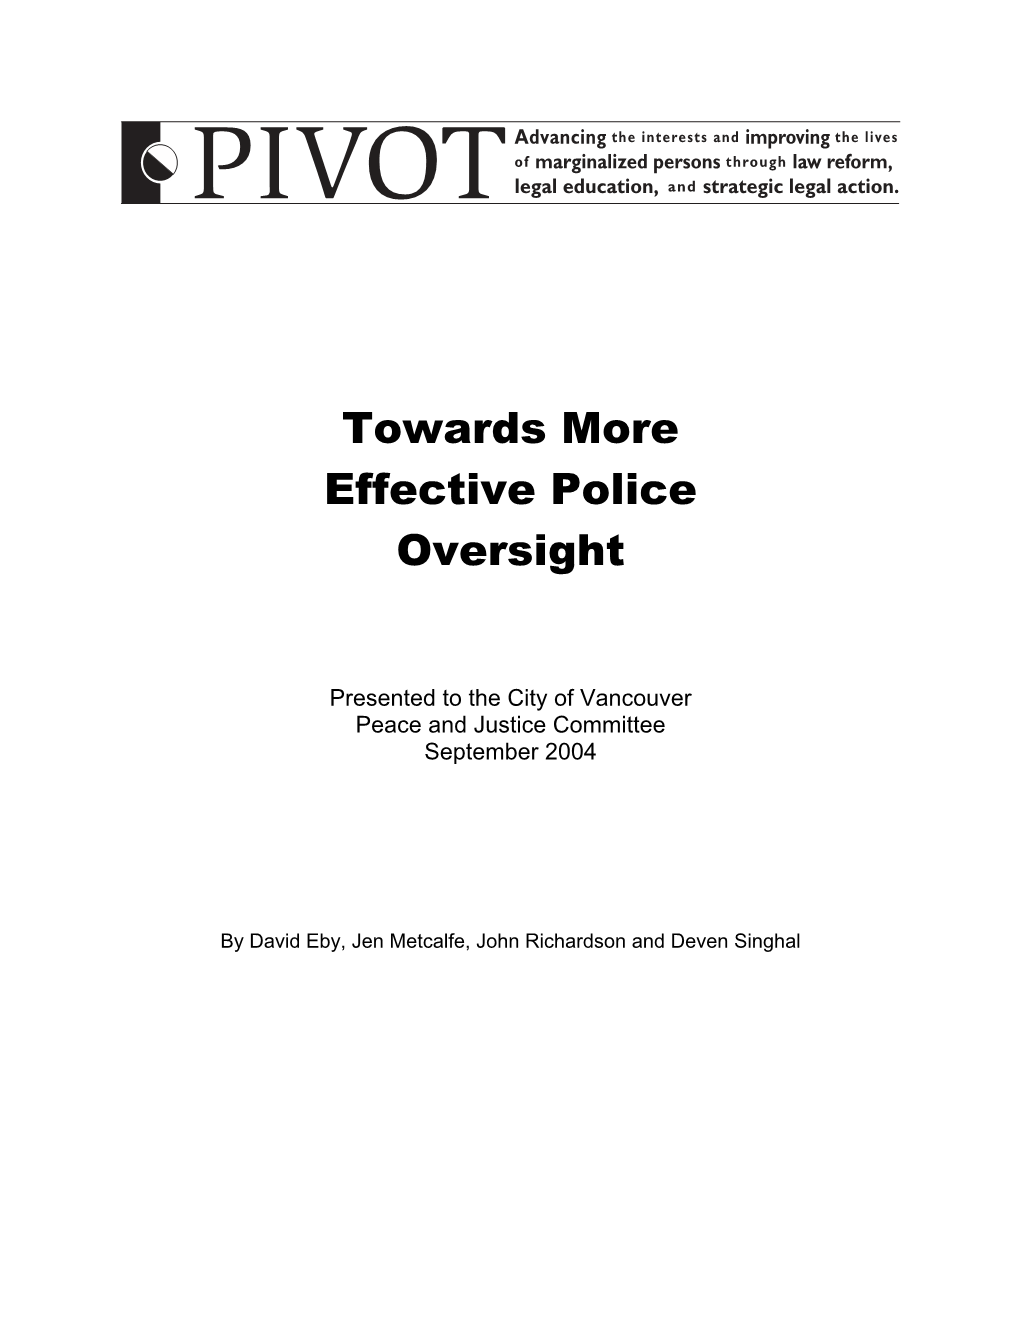 Towards More Effective Police Oversight